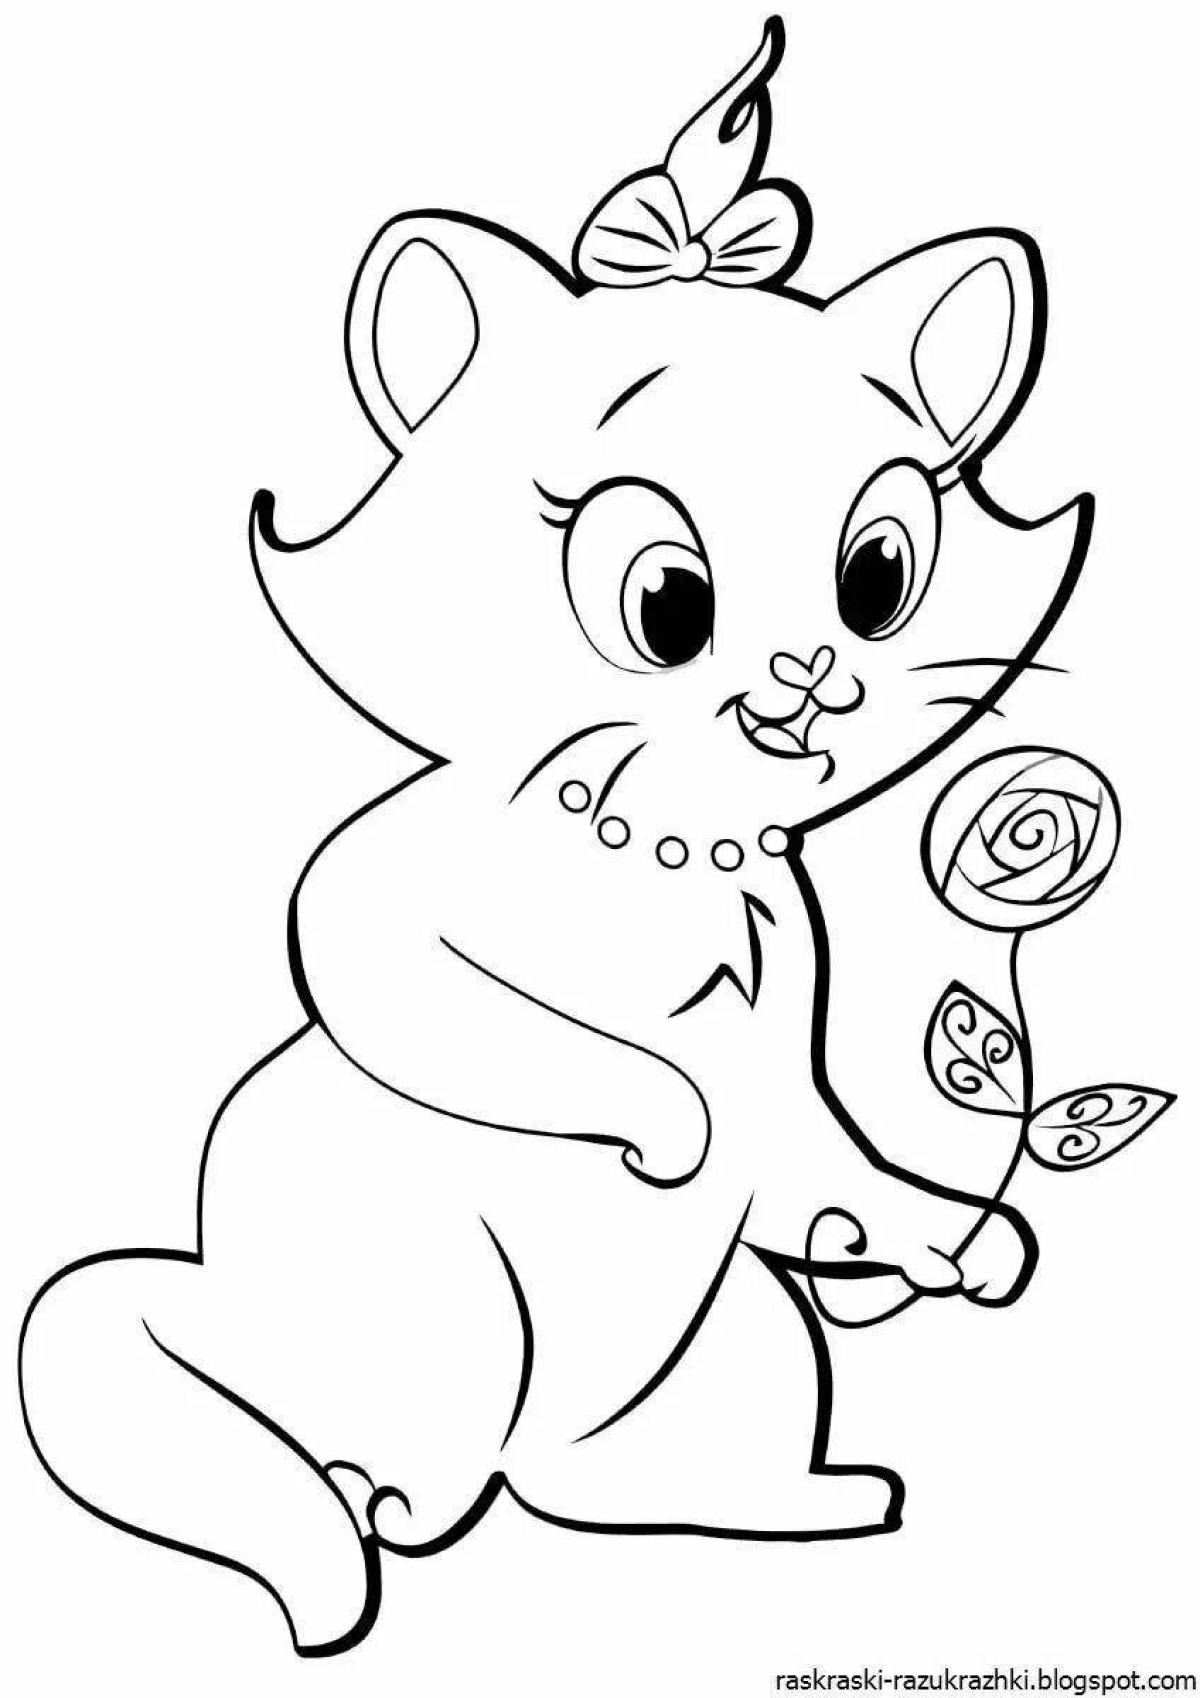 Cute pussy coloring page